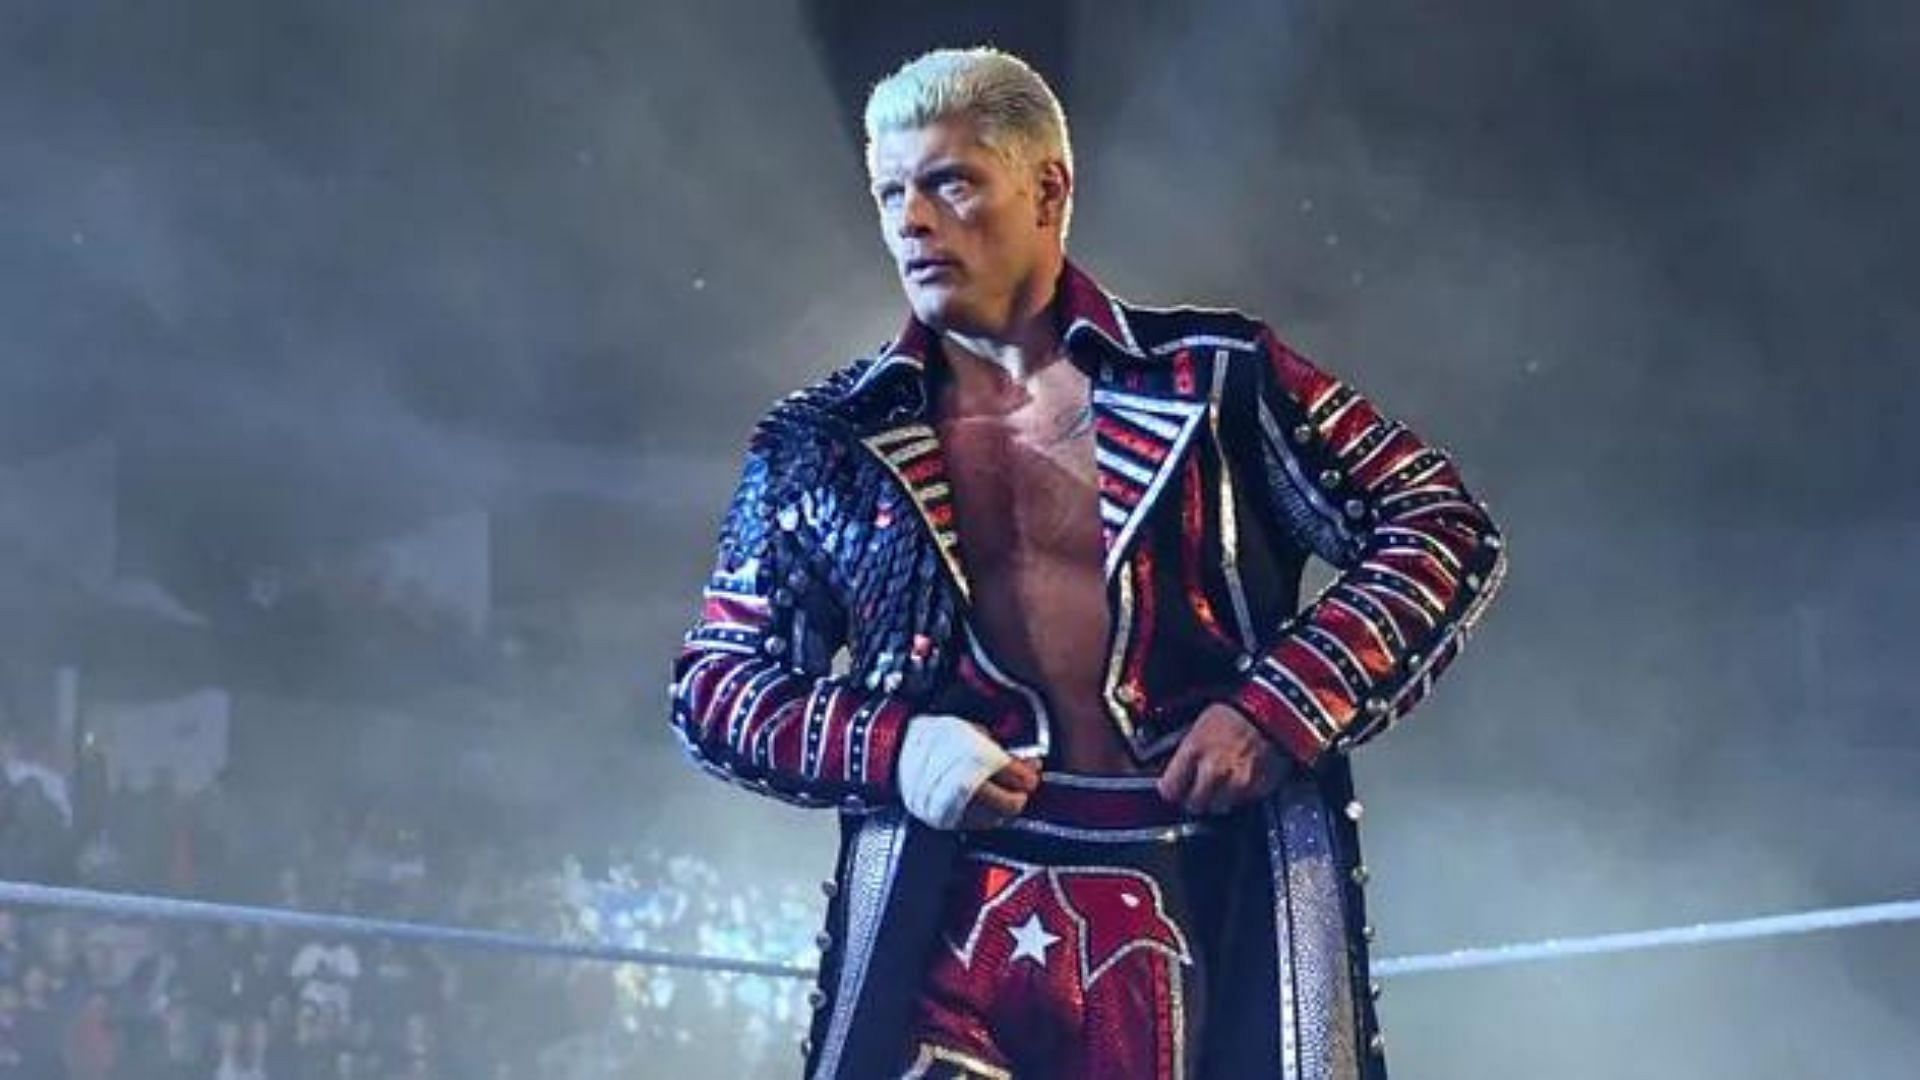 Will Cody Rhodes finish the story down the line?